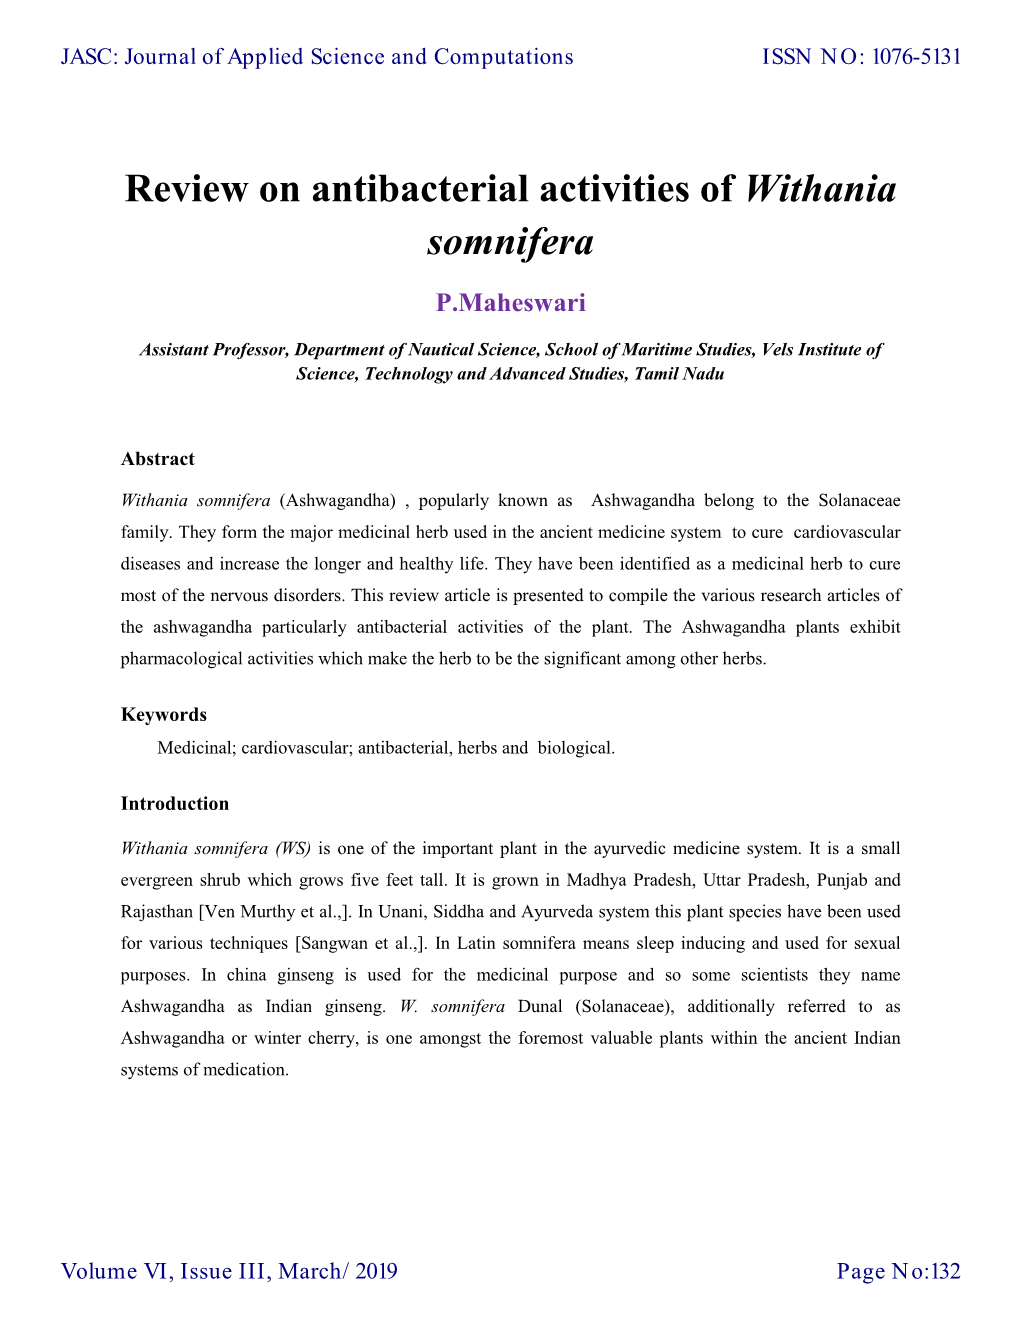 Review on Antibacterial Activities of Withania Somnifera